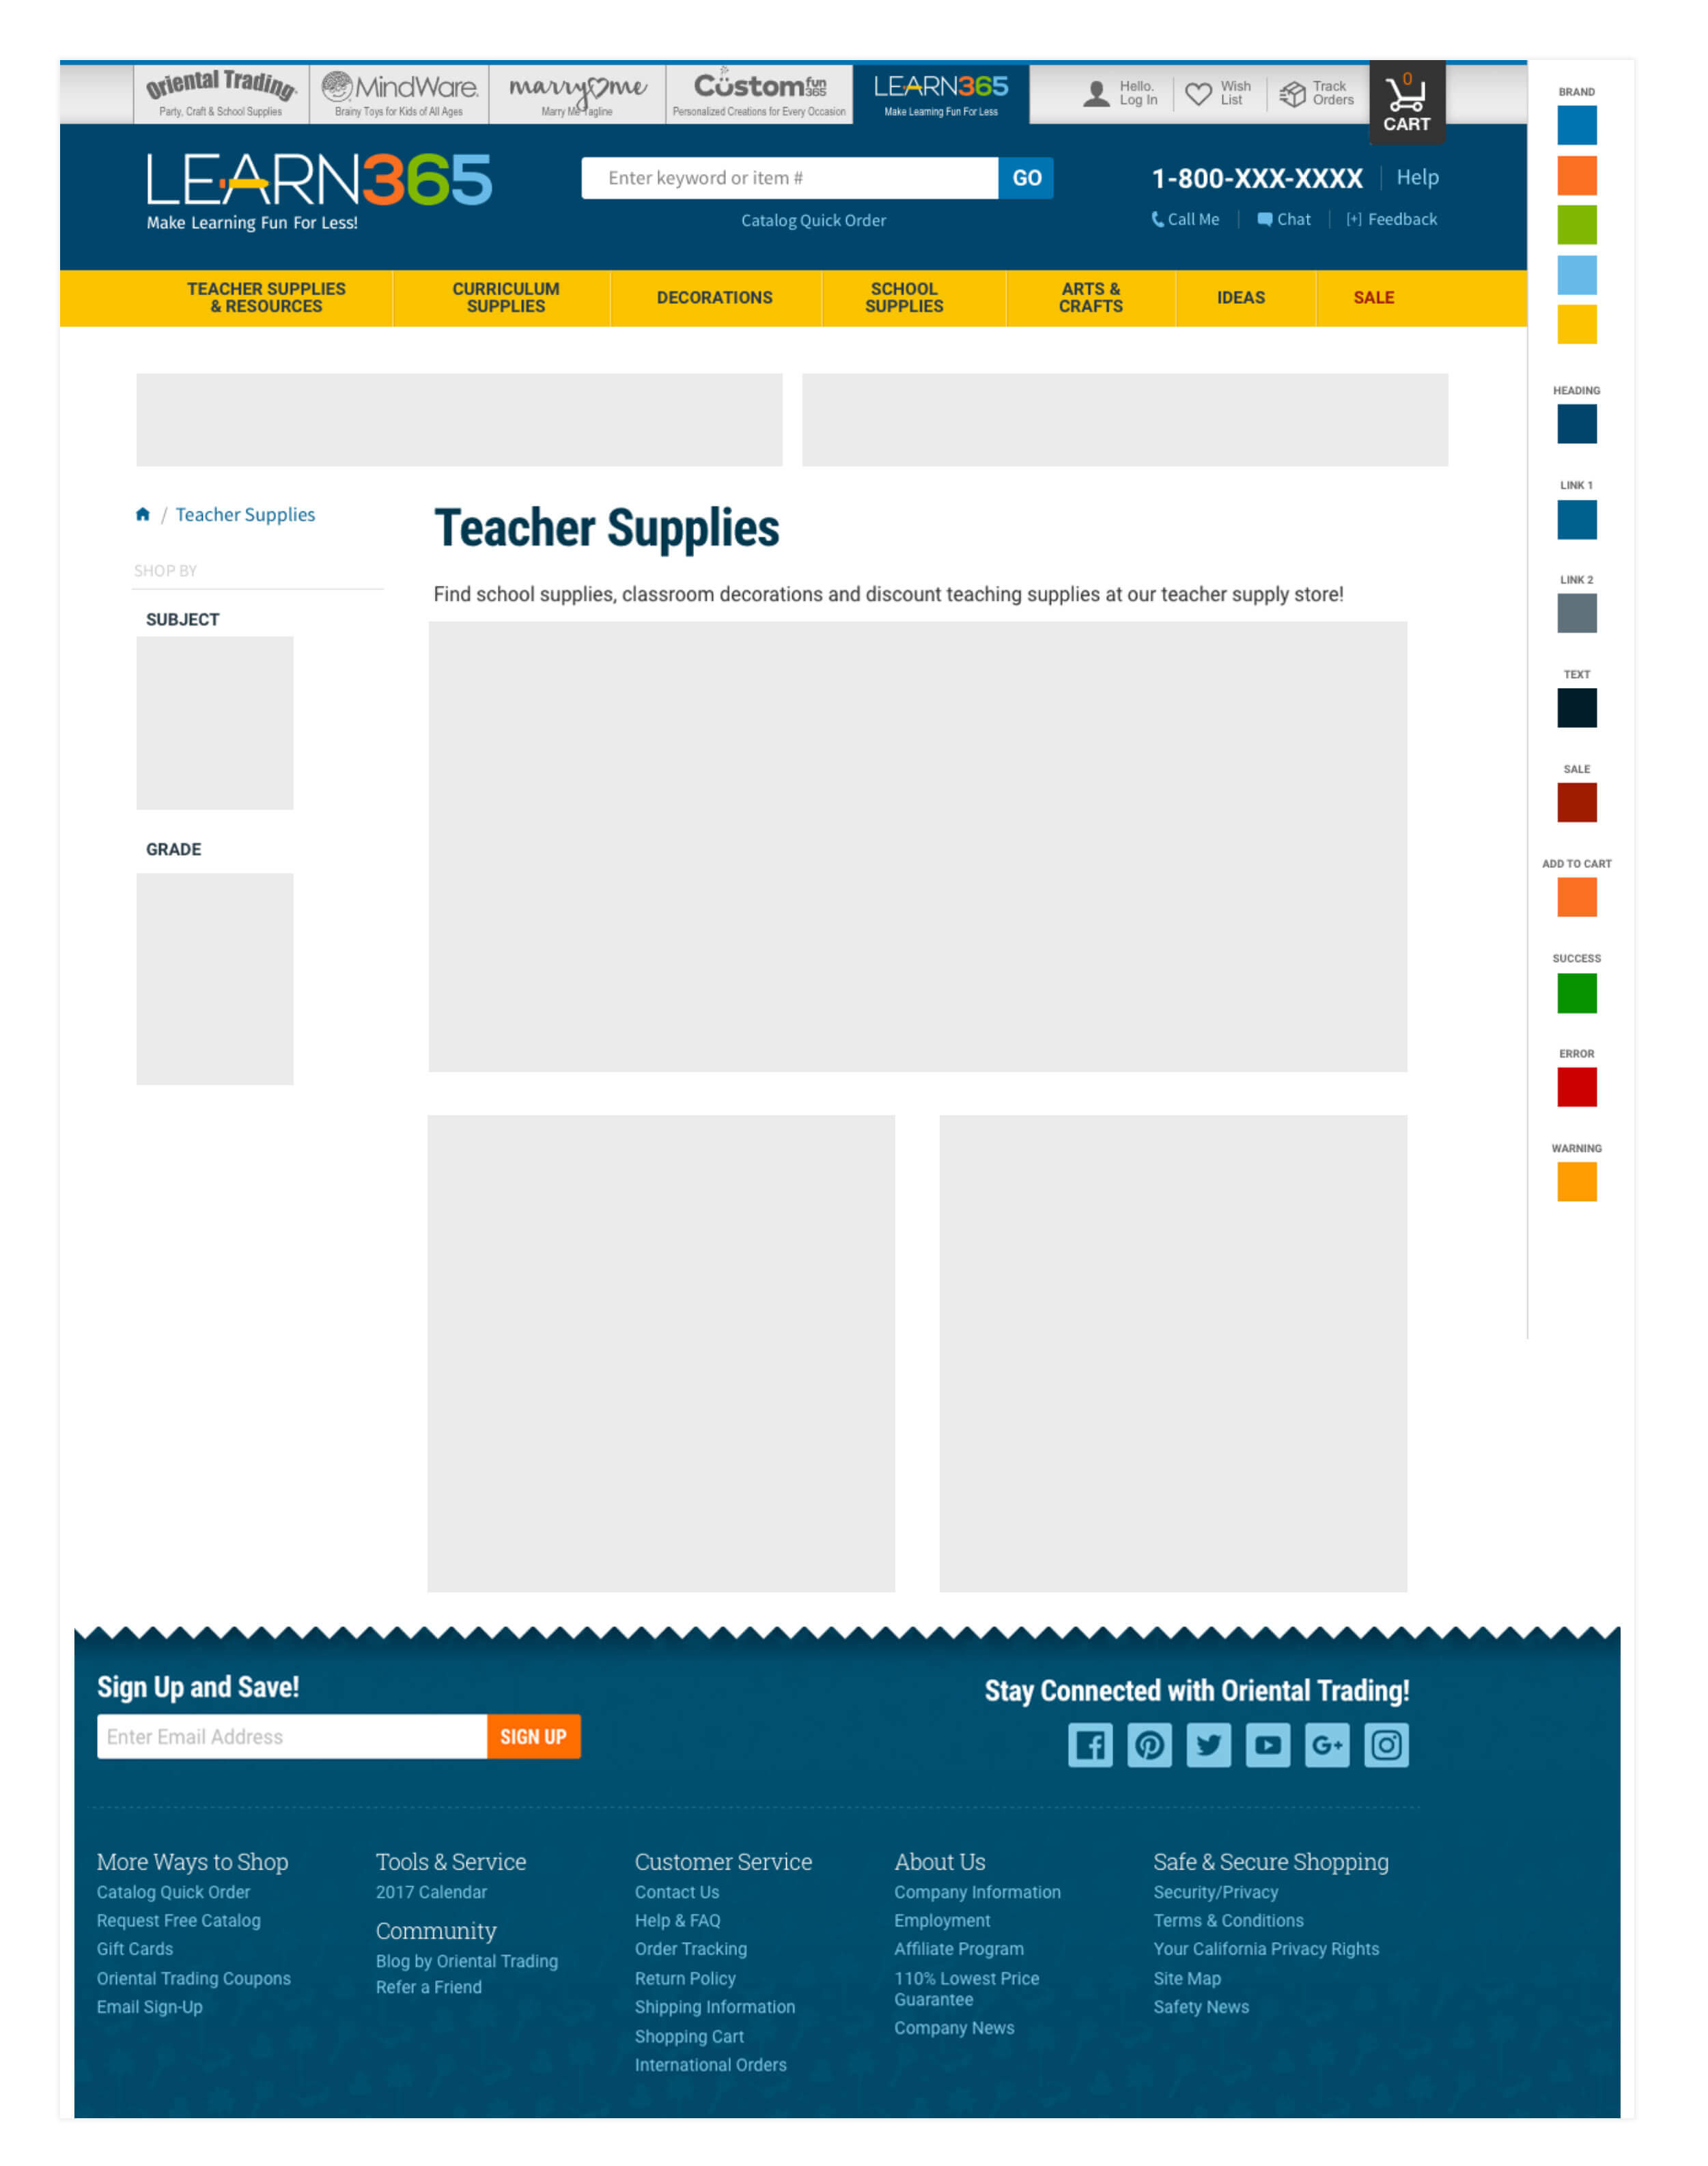 Wireframe of the Learn365 top category page layout